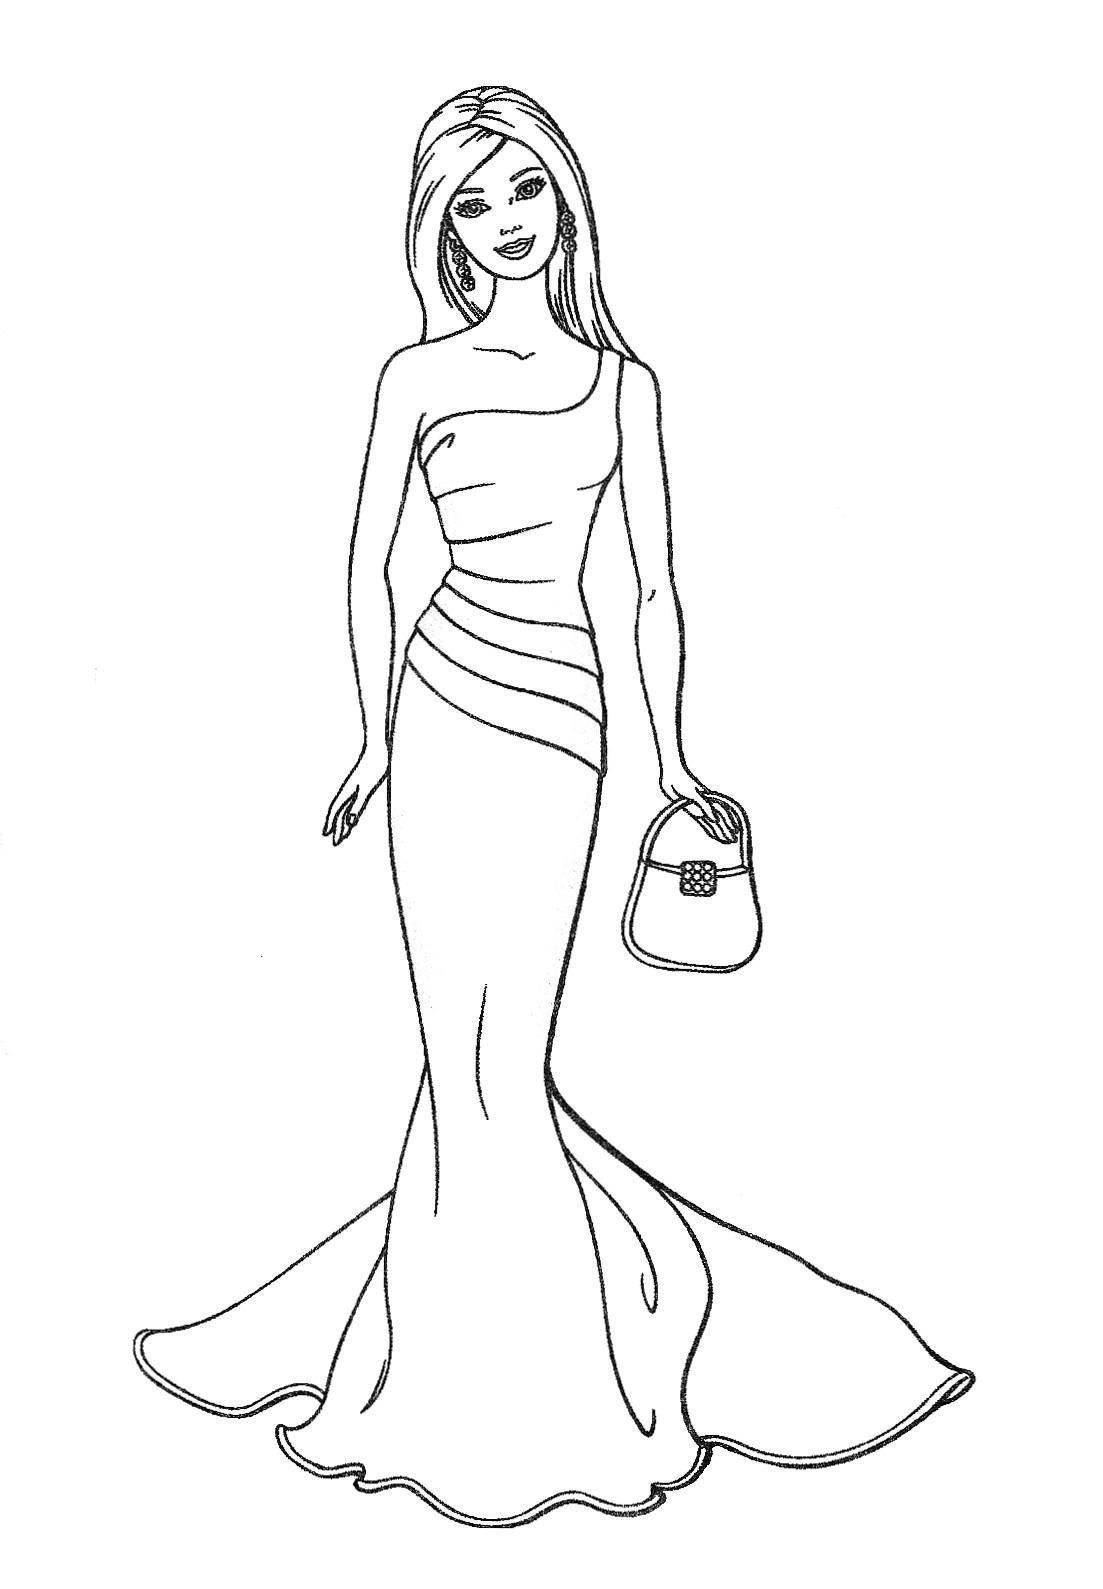 Barbie Cartoon Coloring Pages For Girls - Coloring Pages For All Ages